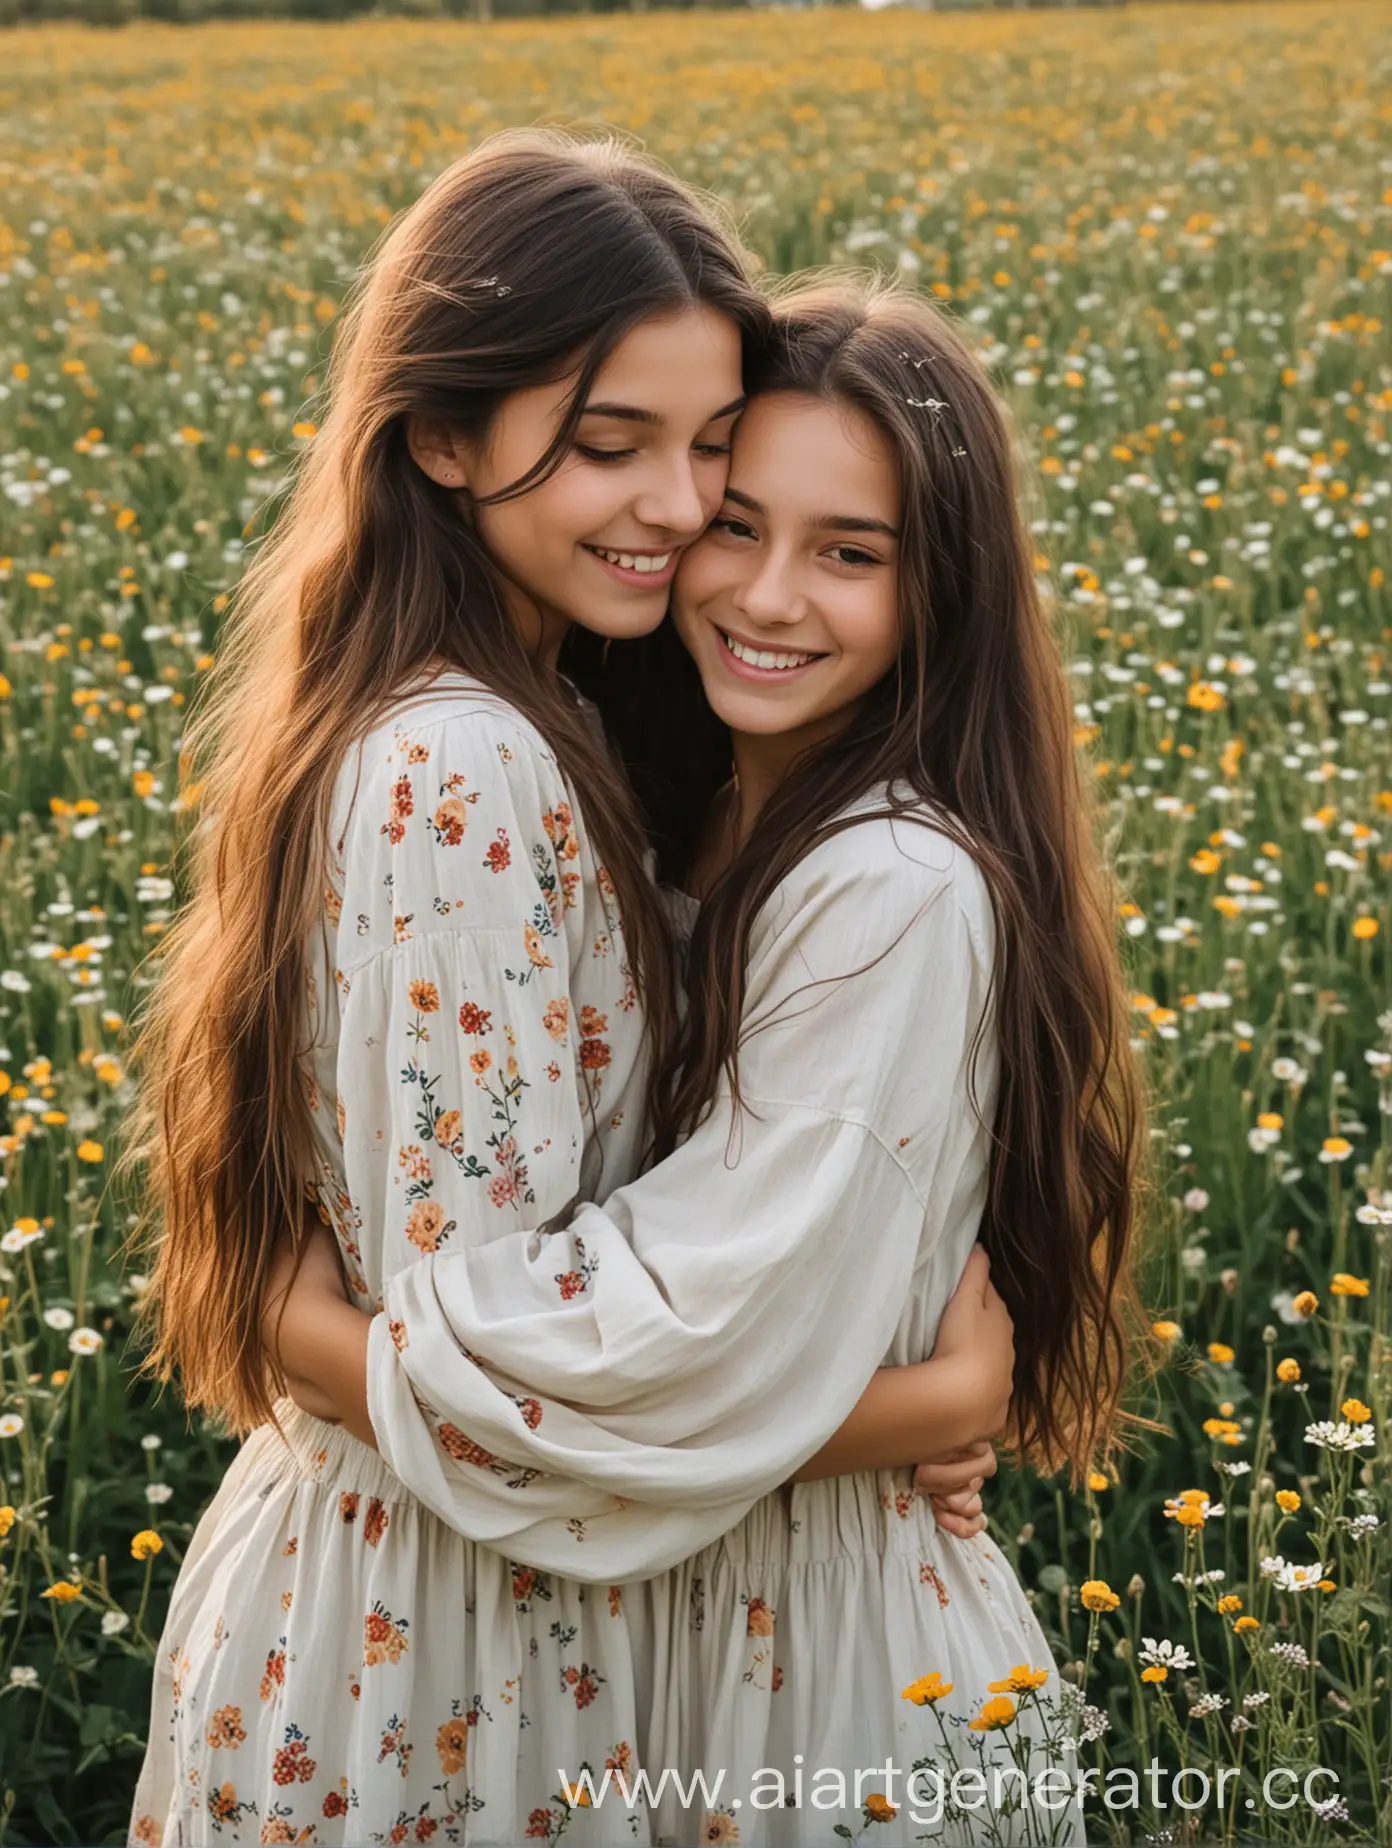 Sisters-Embracing-in-Flower-Field-Joyful-Girls-with-Dark-and-Light-Hair